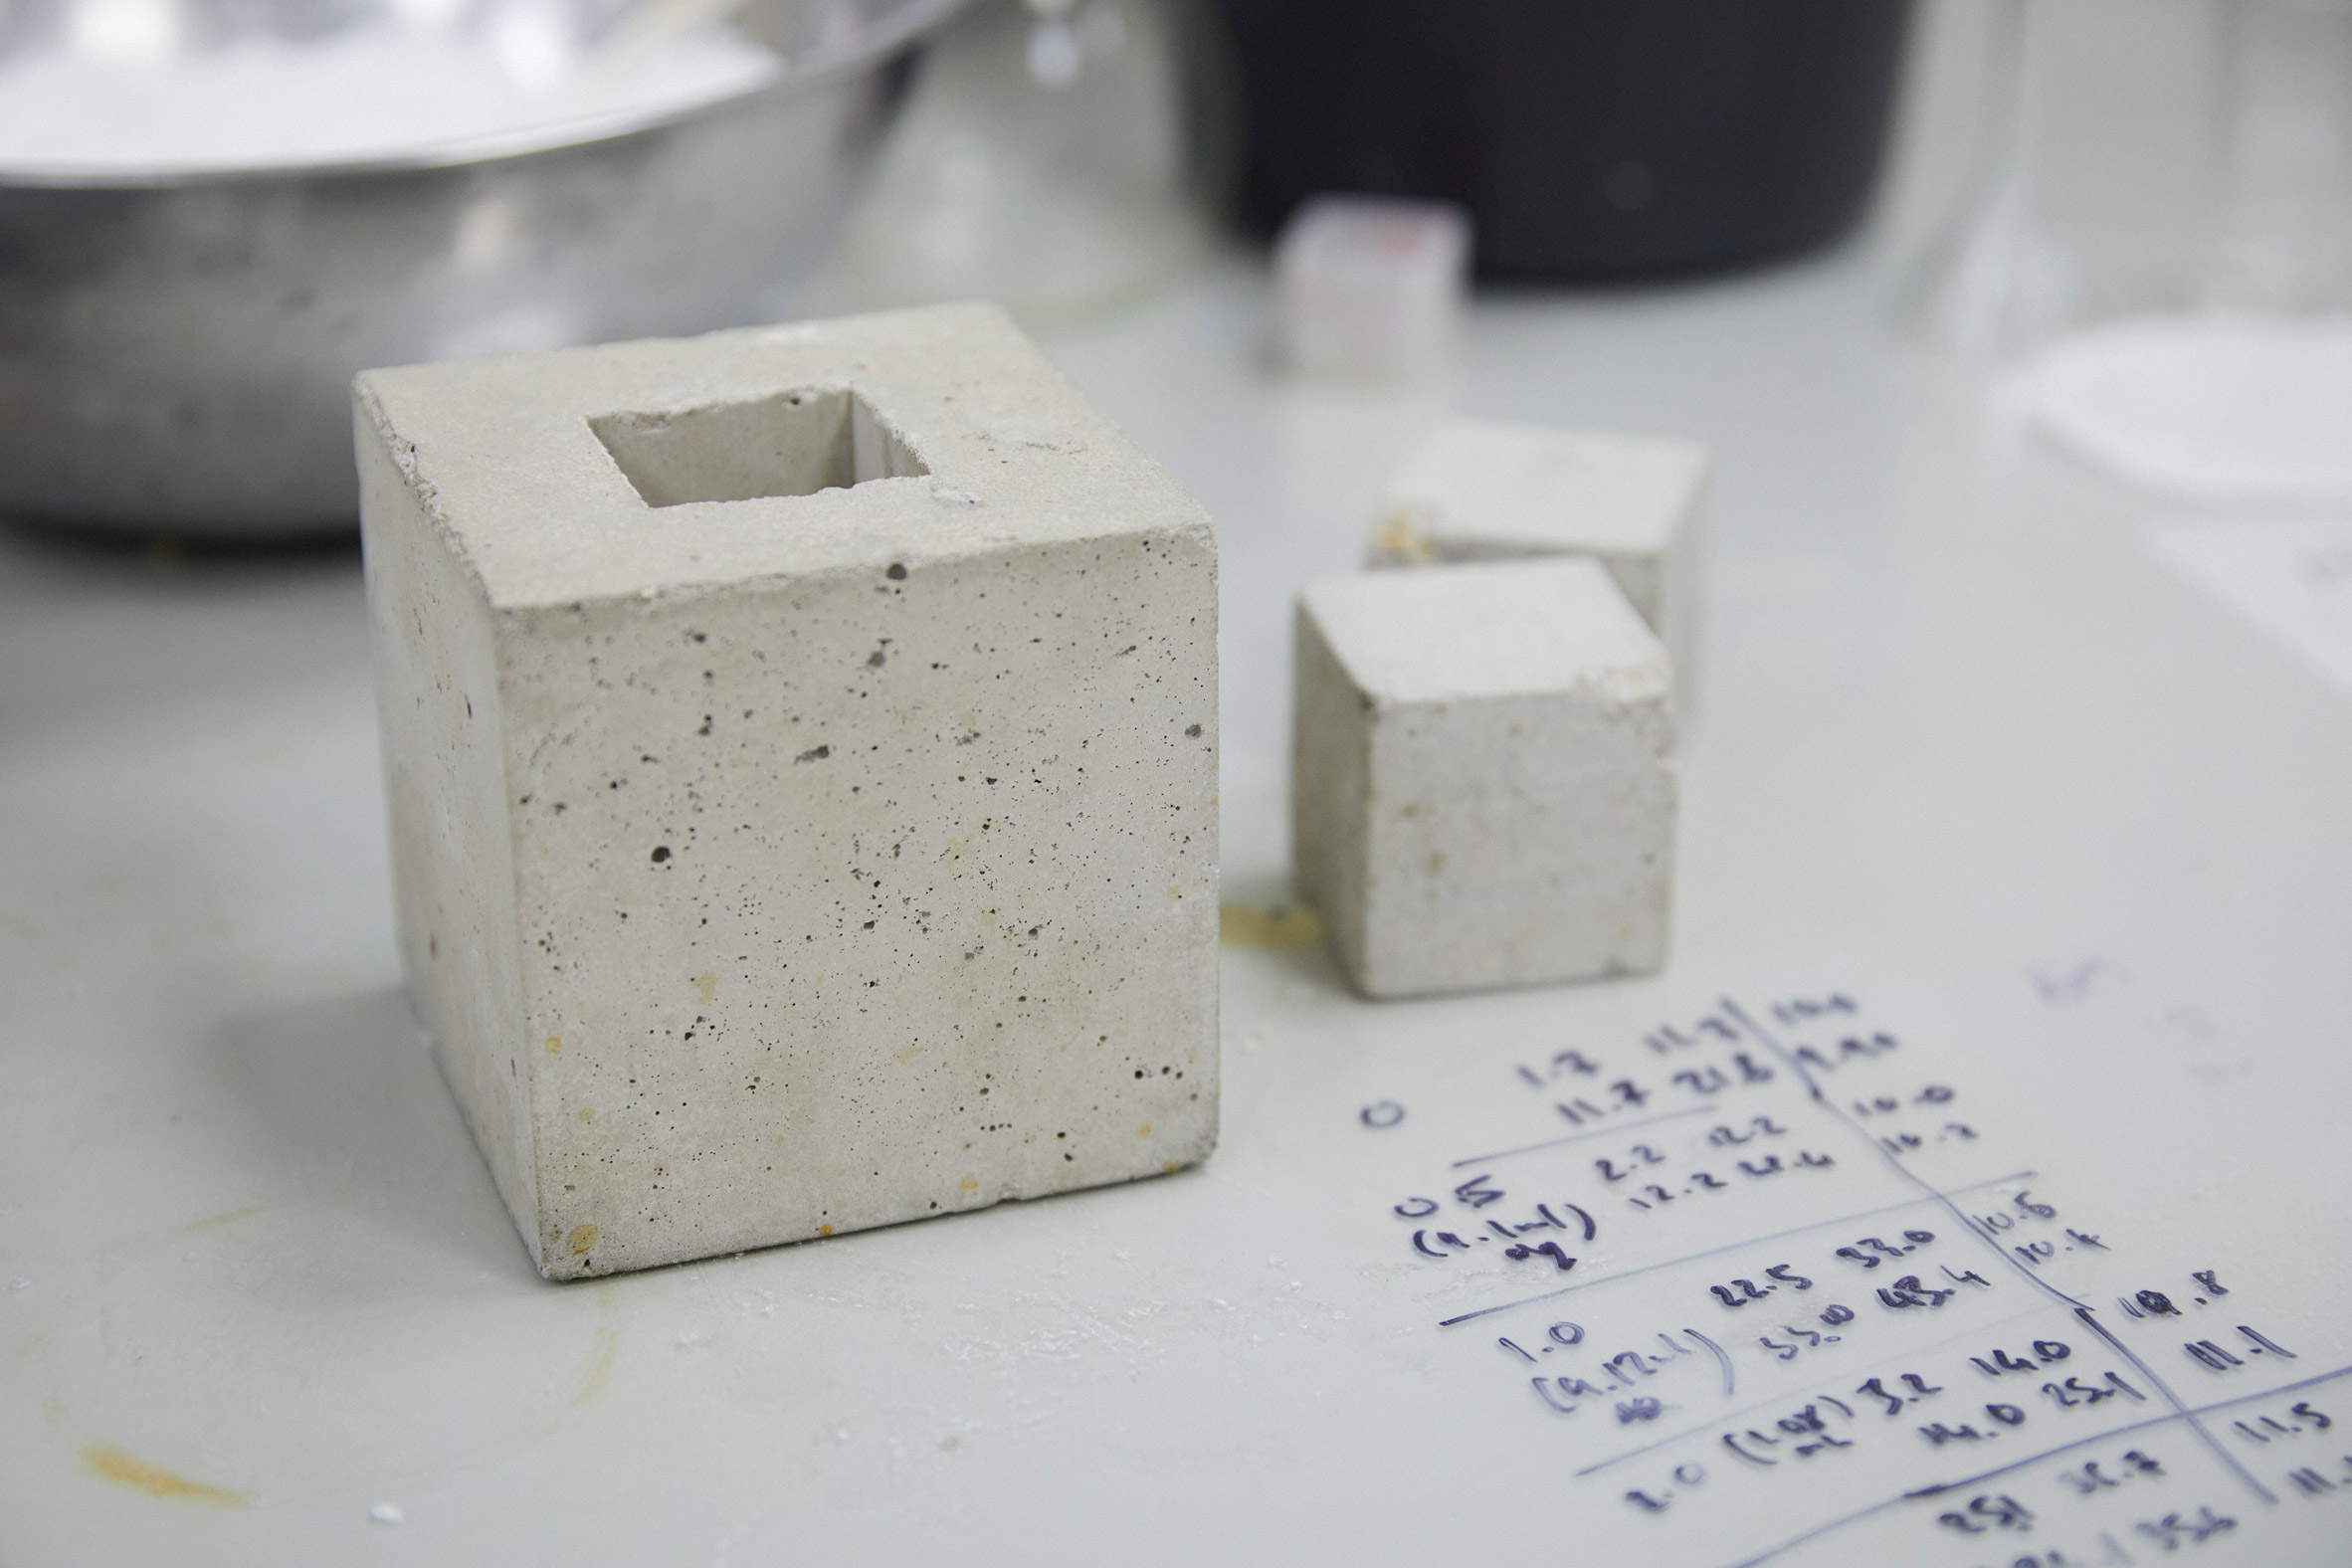 Cubes of Seratech prototype carbon-neutral concrete on a worktable